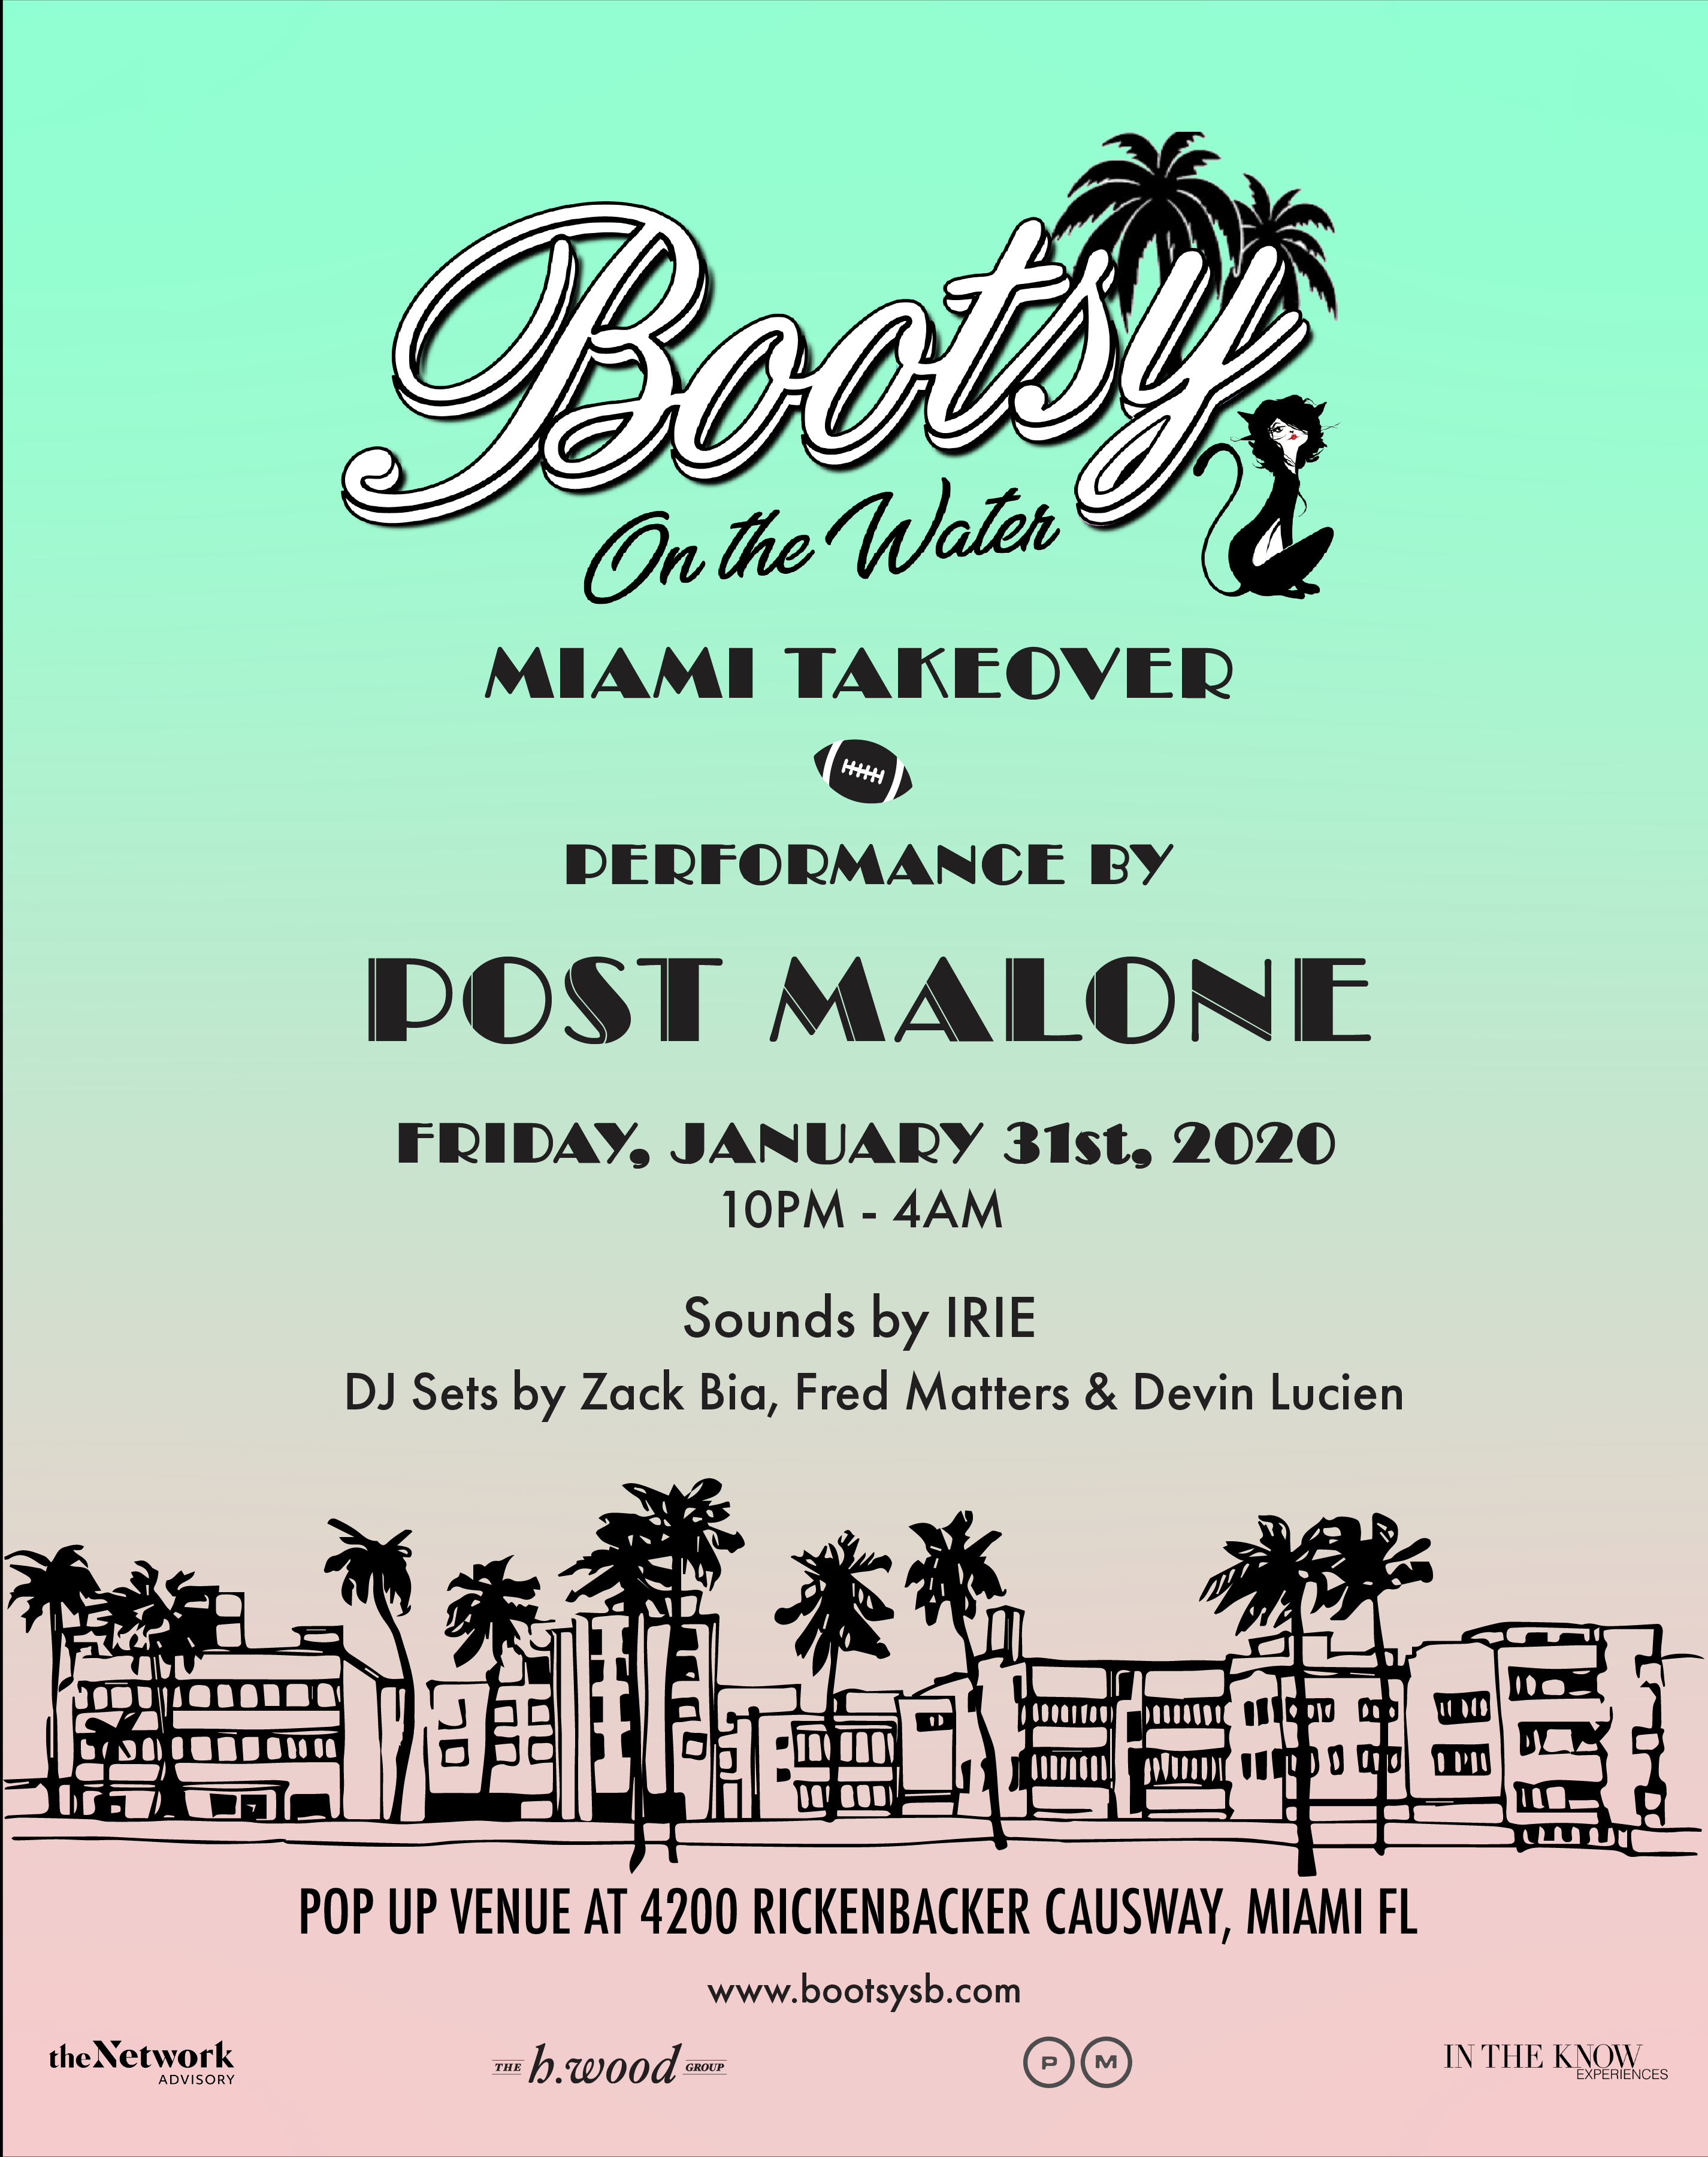 Post Malone Super Bowl Party 2020 - Bootsy on the Water Miami Takeover